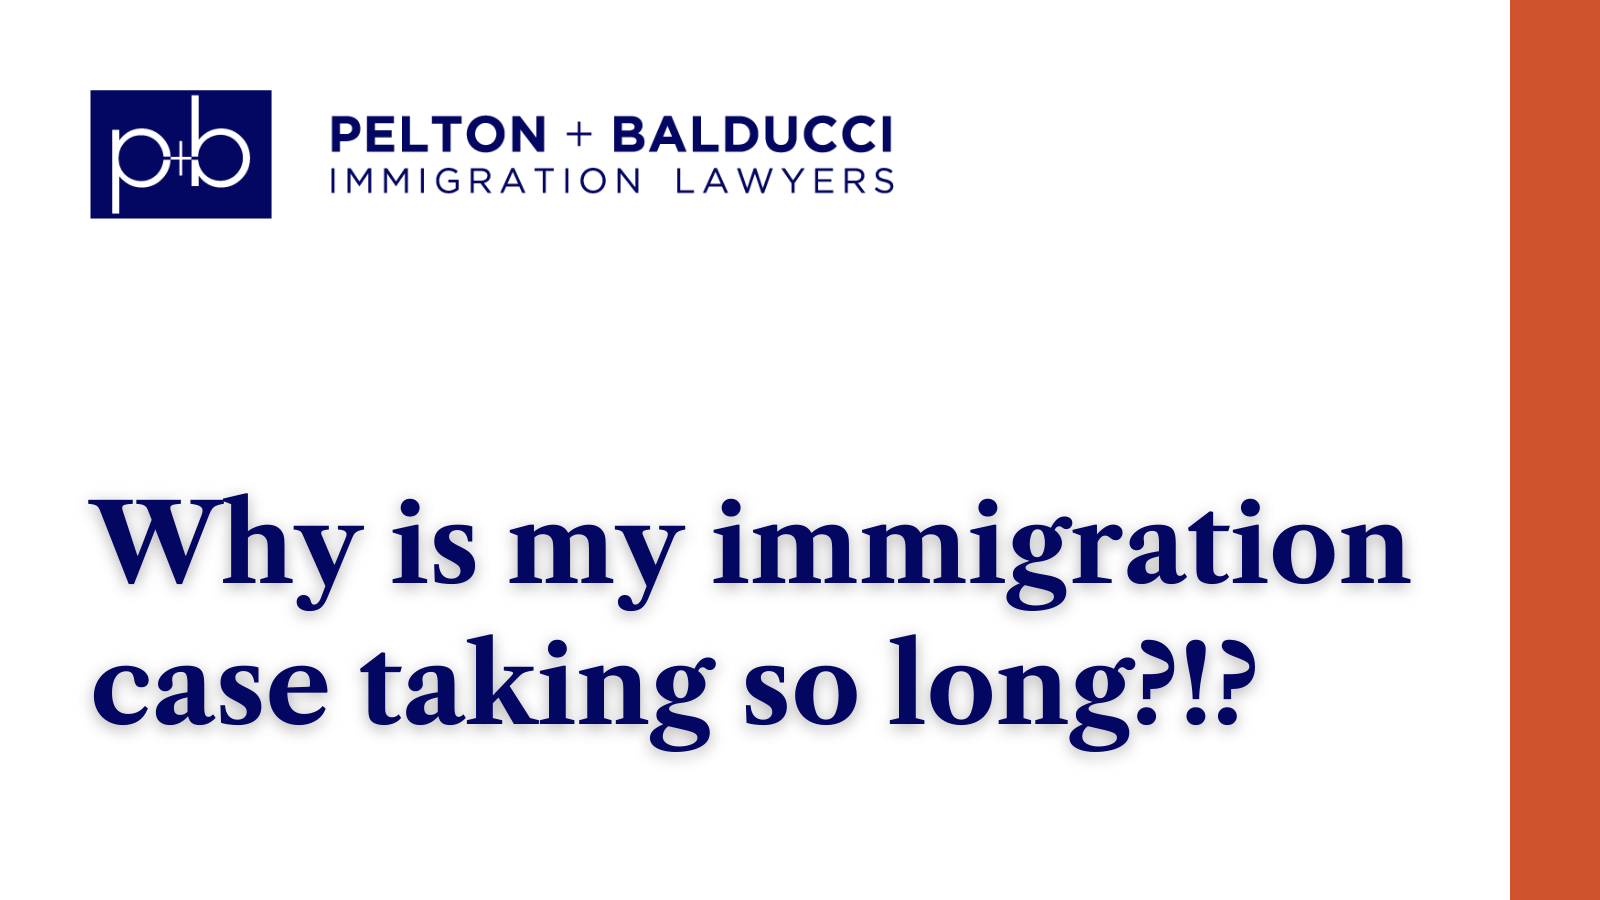 Why is my immigration case taking so long - New Orleans Immigration Lawyers - Pelton Balducci